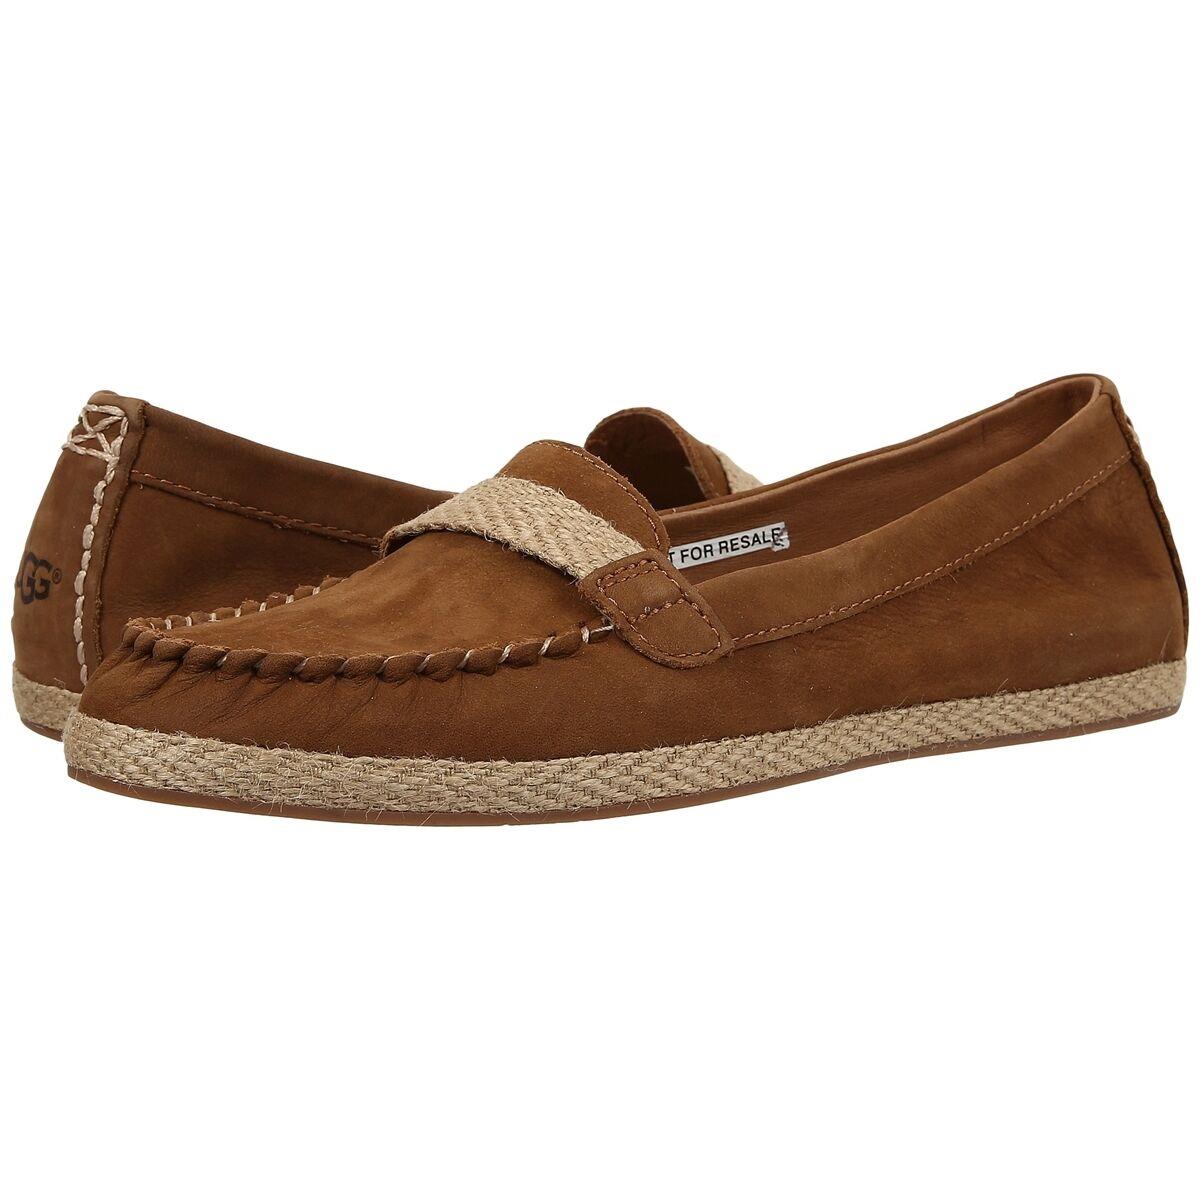 Womens Ugg Rozie Moccasins Nubuck Espadrille Loafers Casual Slip On Shoes Chestnut